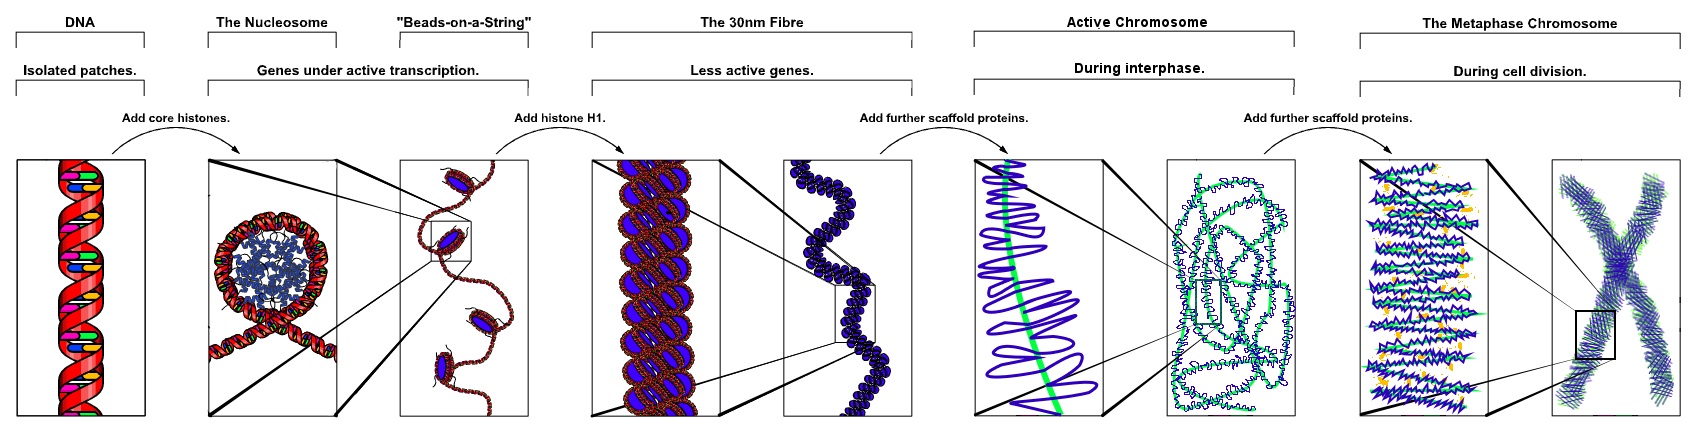 Fig. 2: The major structures in DNA compaction; DNA, the nucleosome, the 10nm "beads-on-a-string" fibre, the 30nm fibre and the metaphase chromosome.